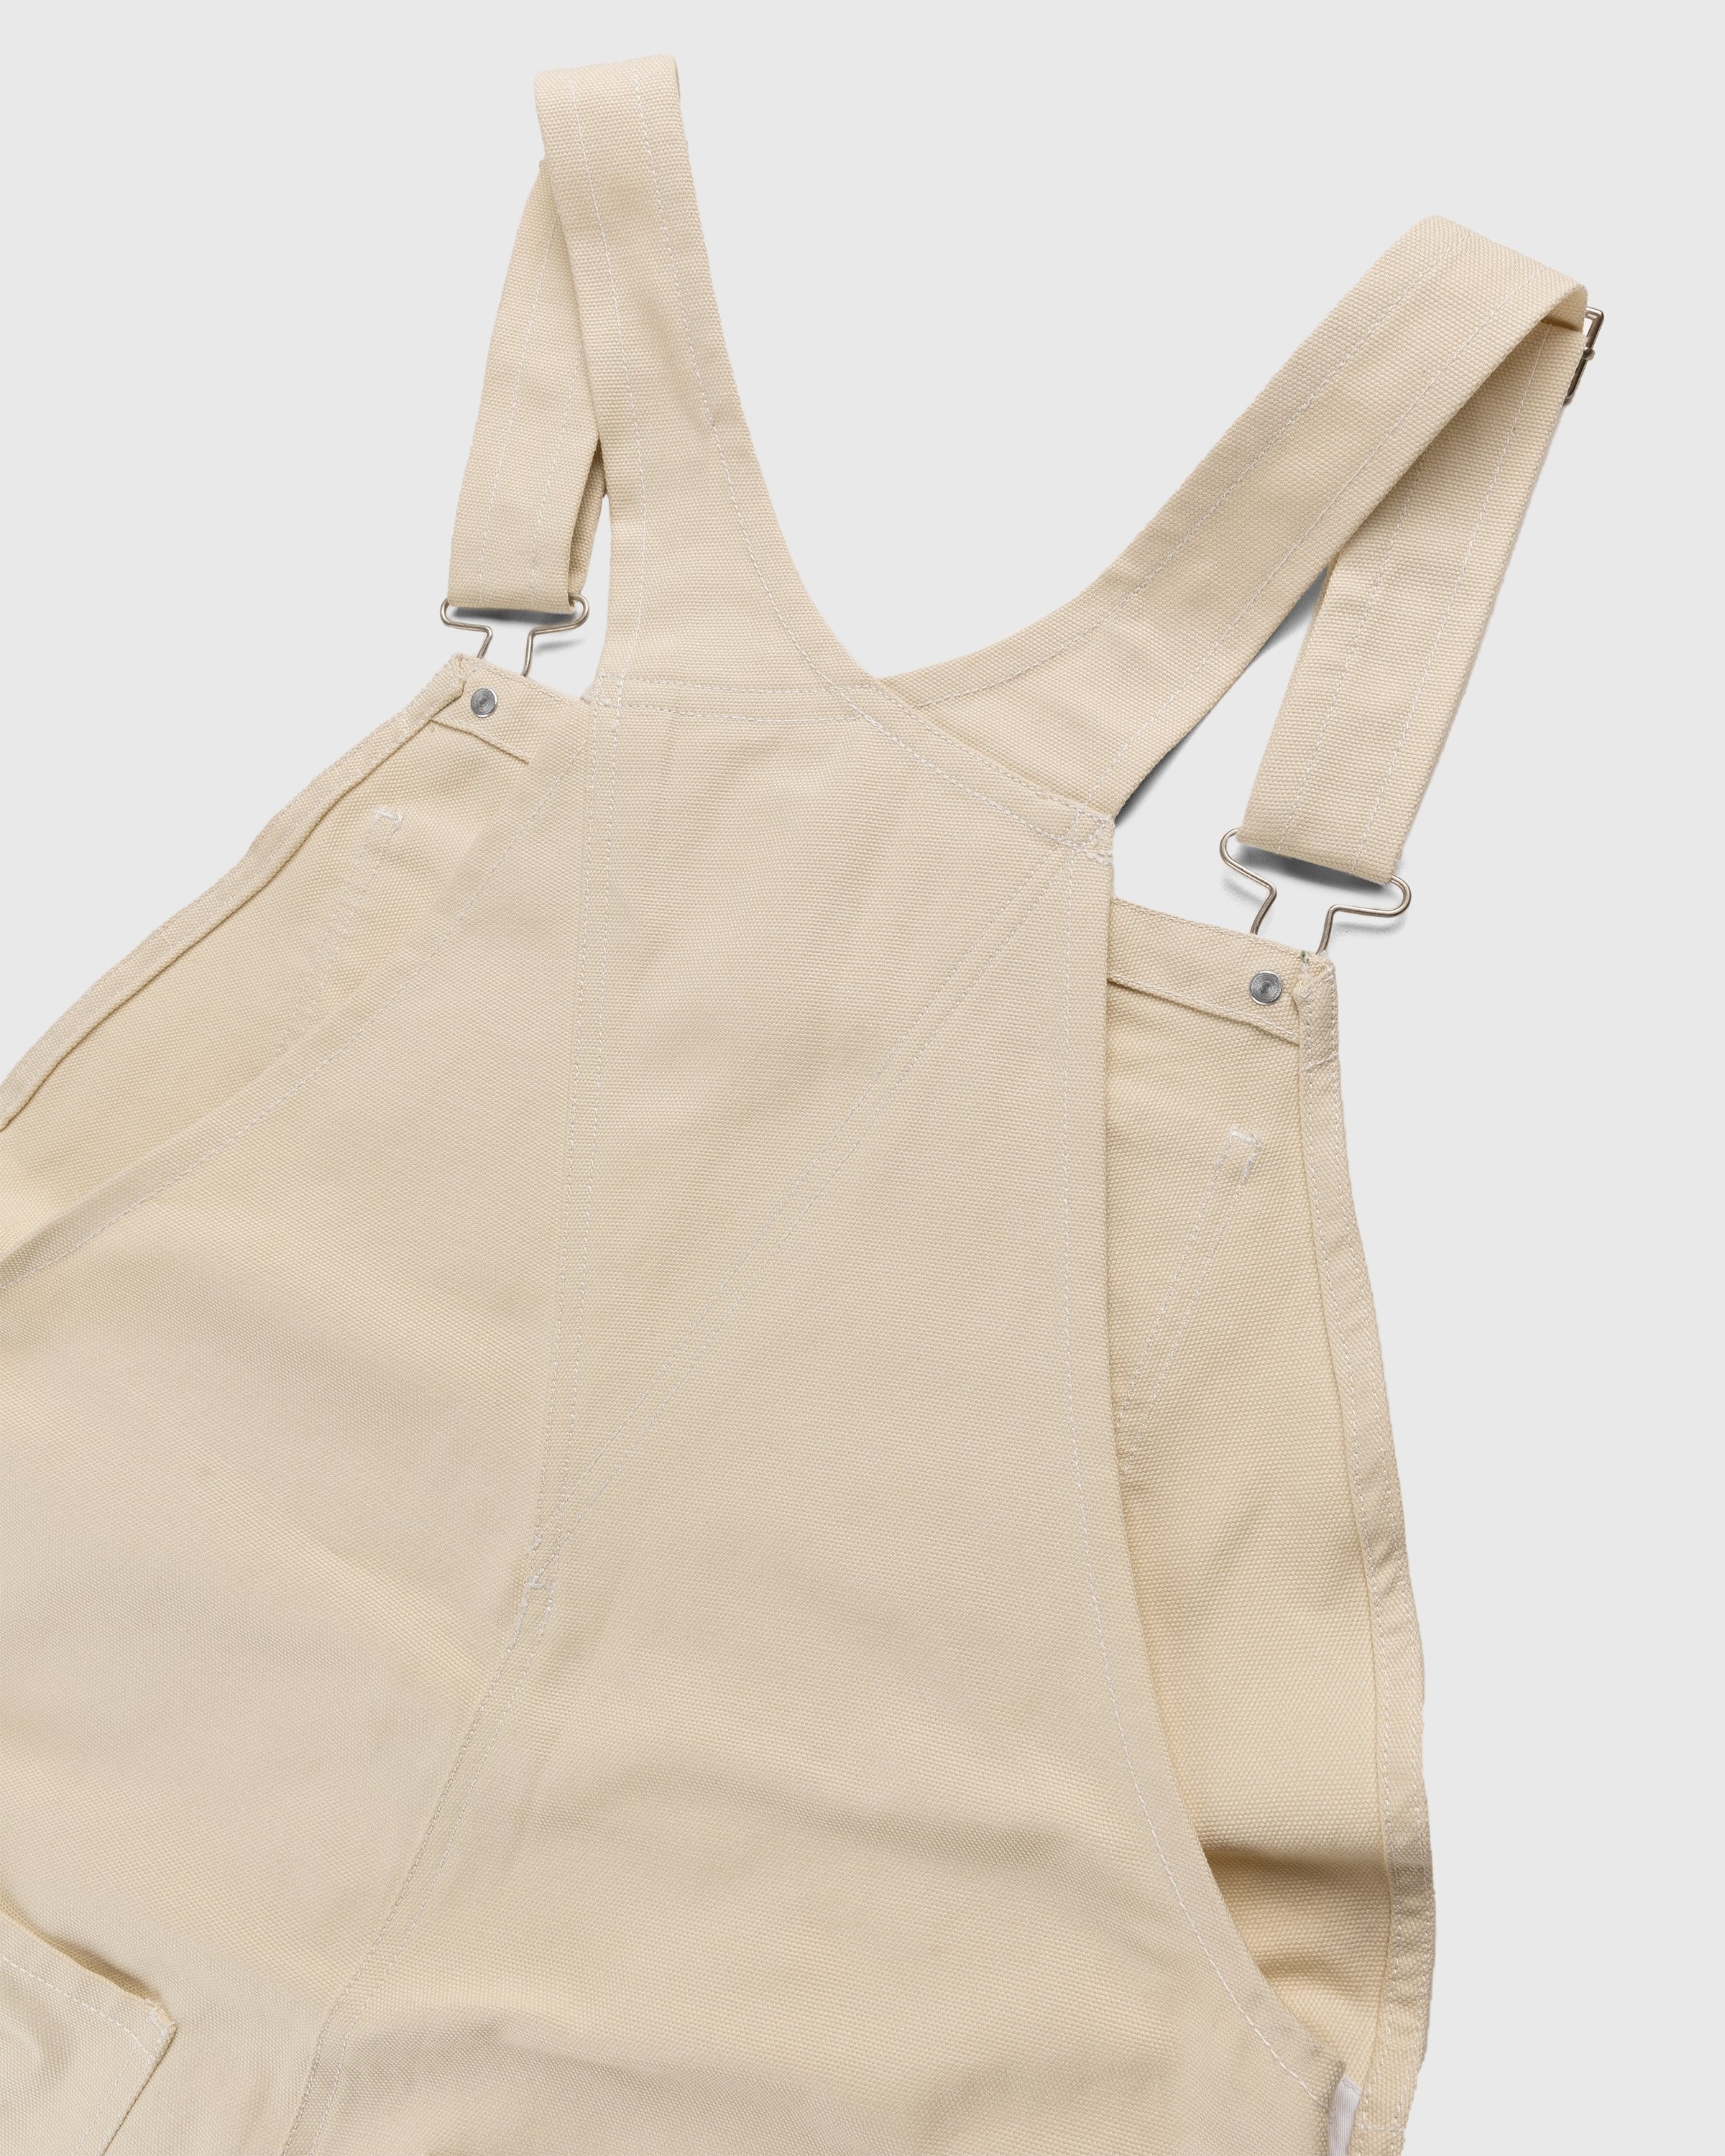 RUF x Highsnobiety – Cotton Overalls Natural - Pants - Beige - Image 3